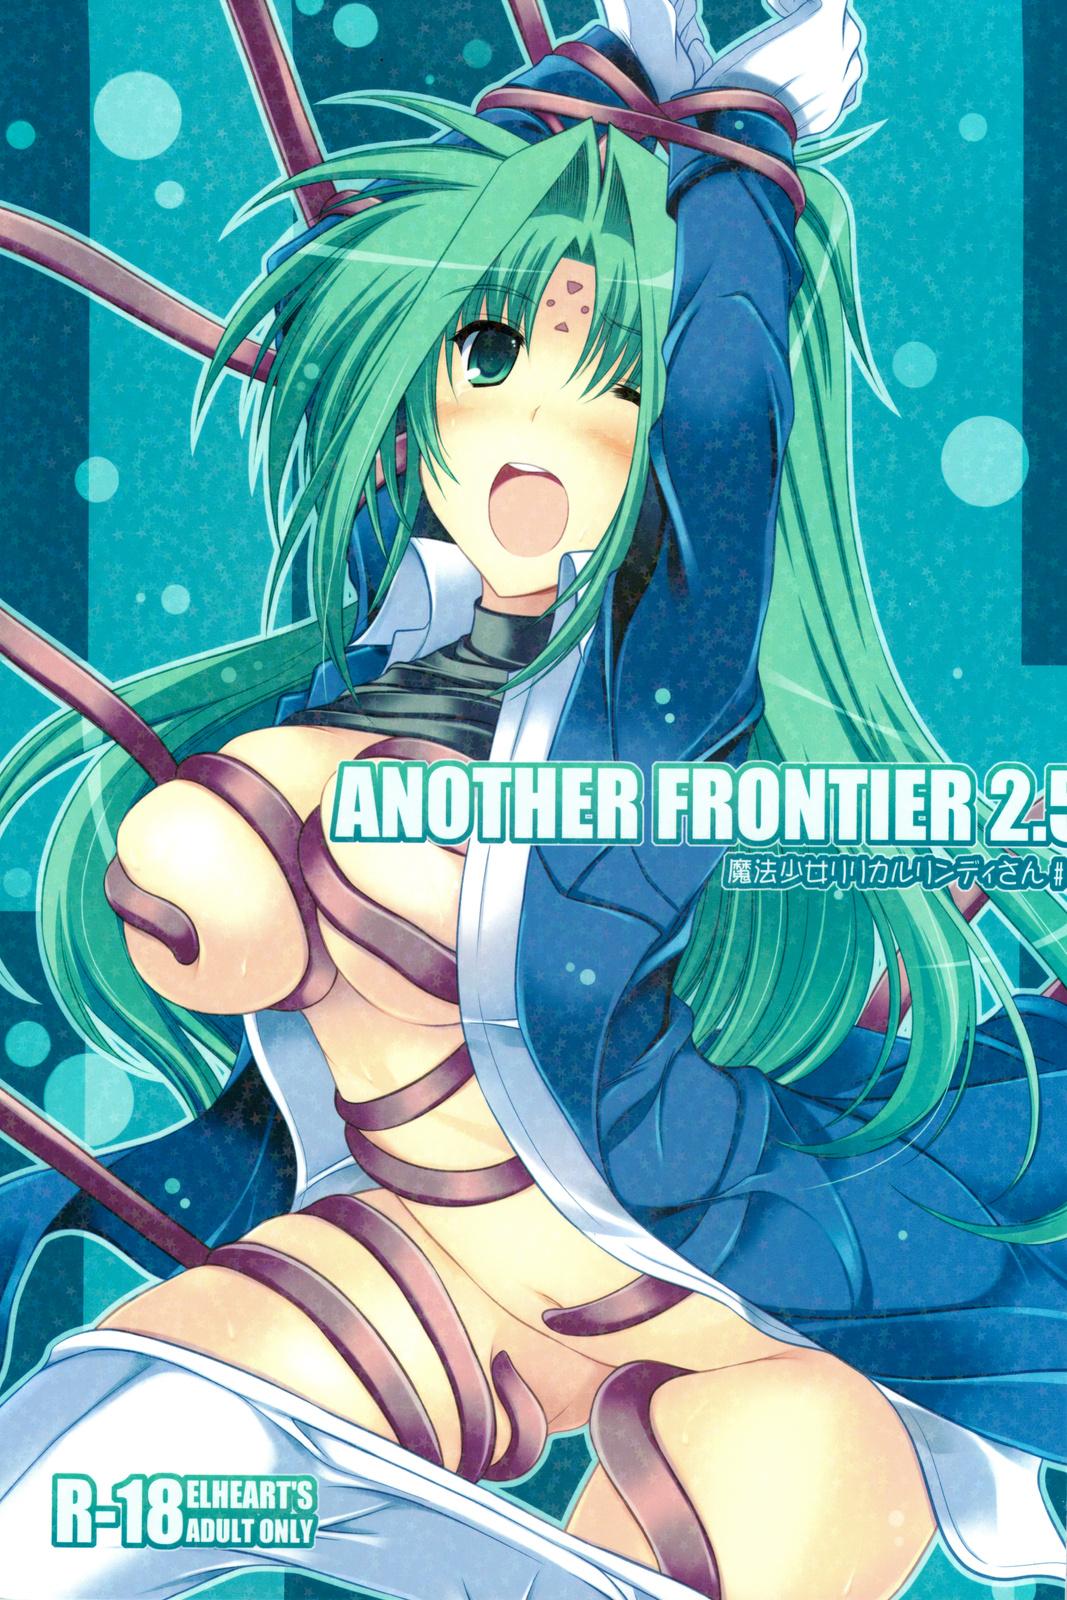 ANOTHER FRONTIER 2.5 Mahou Shoujo Lyrical Lindy san #04 0